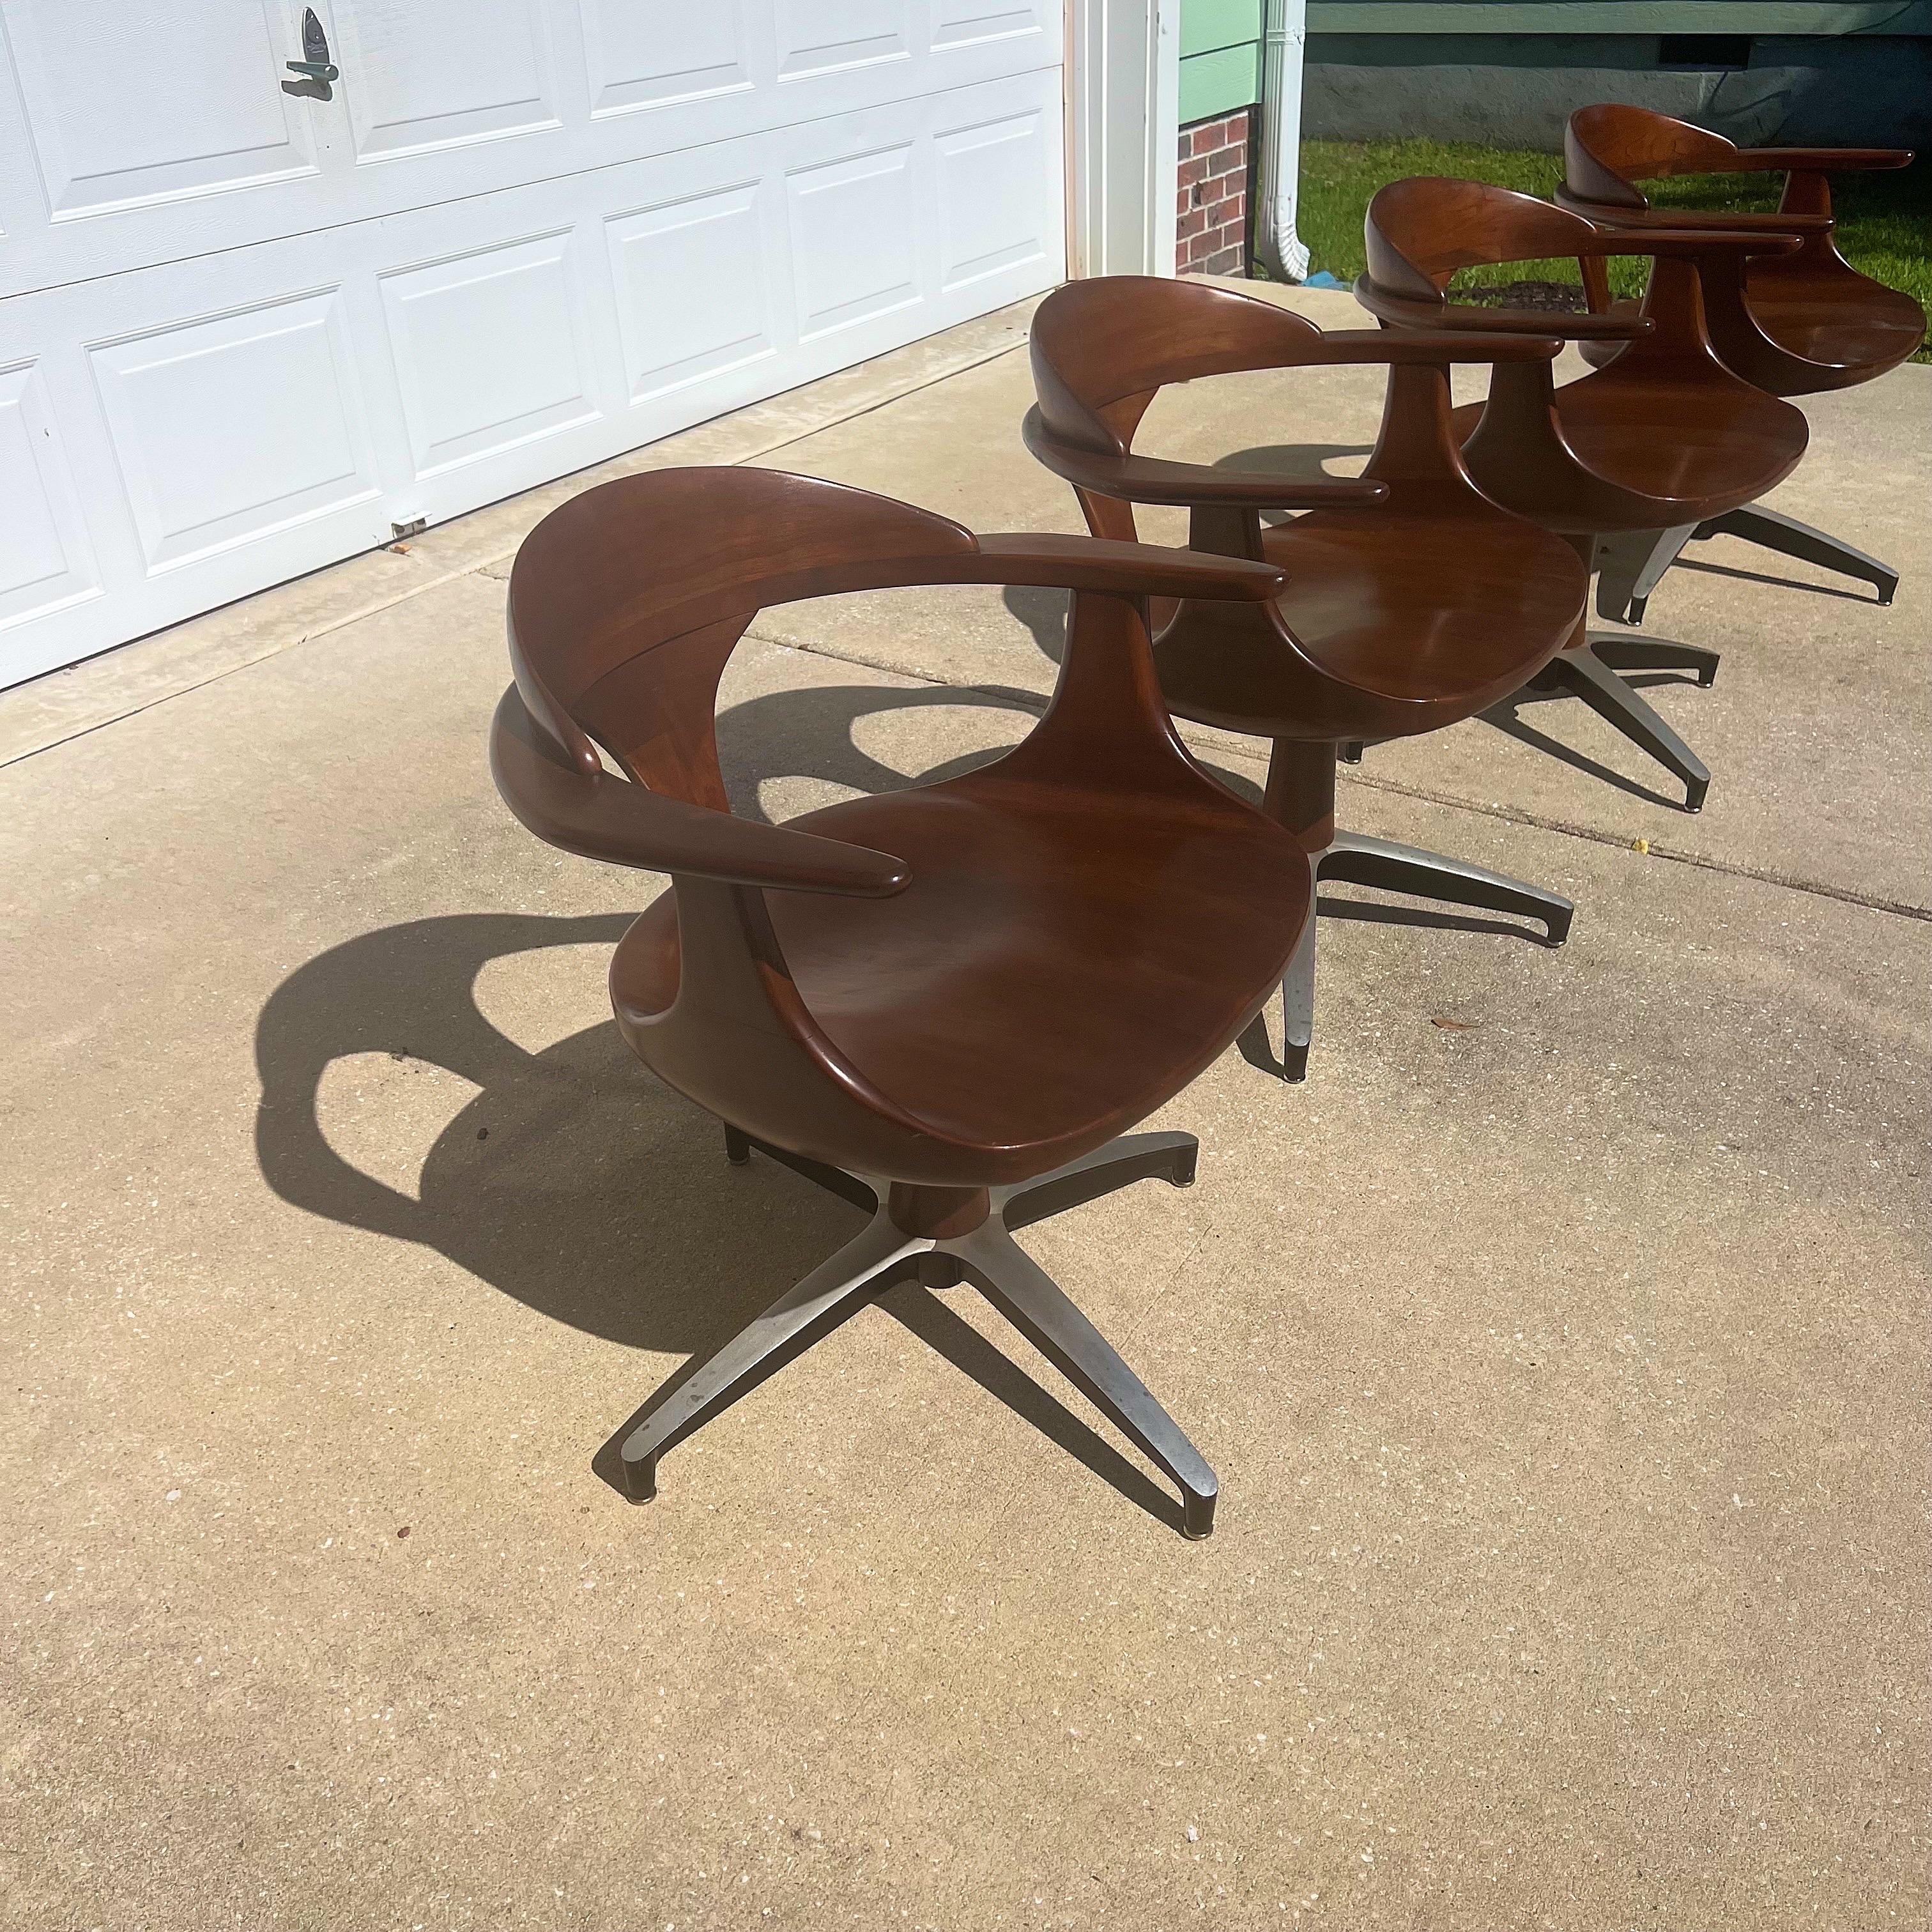 1960s Heywood Wakefield “Cliff House” Dining Table and Chairs, a Set of 5 For Sale 8